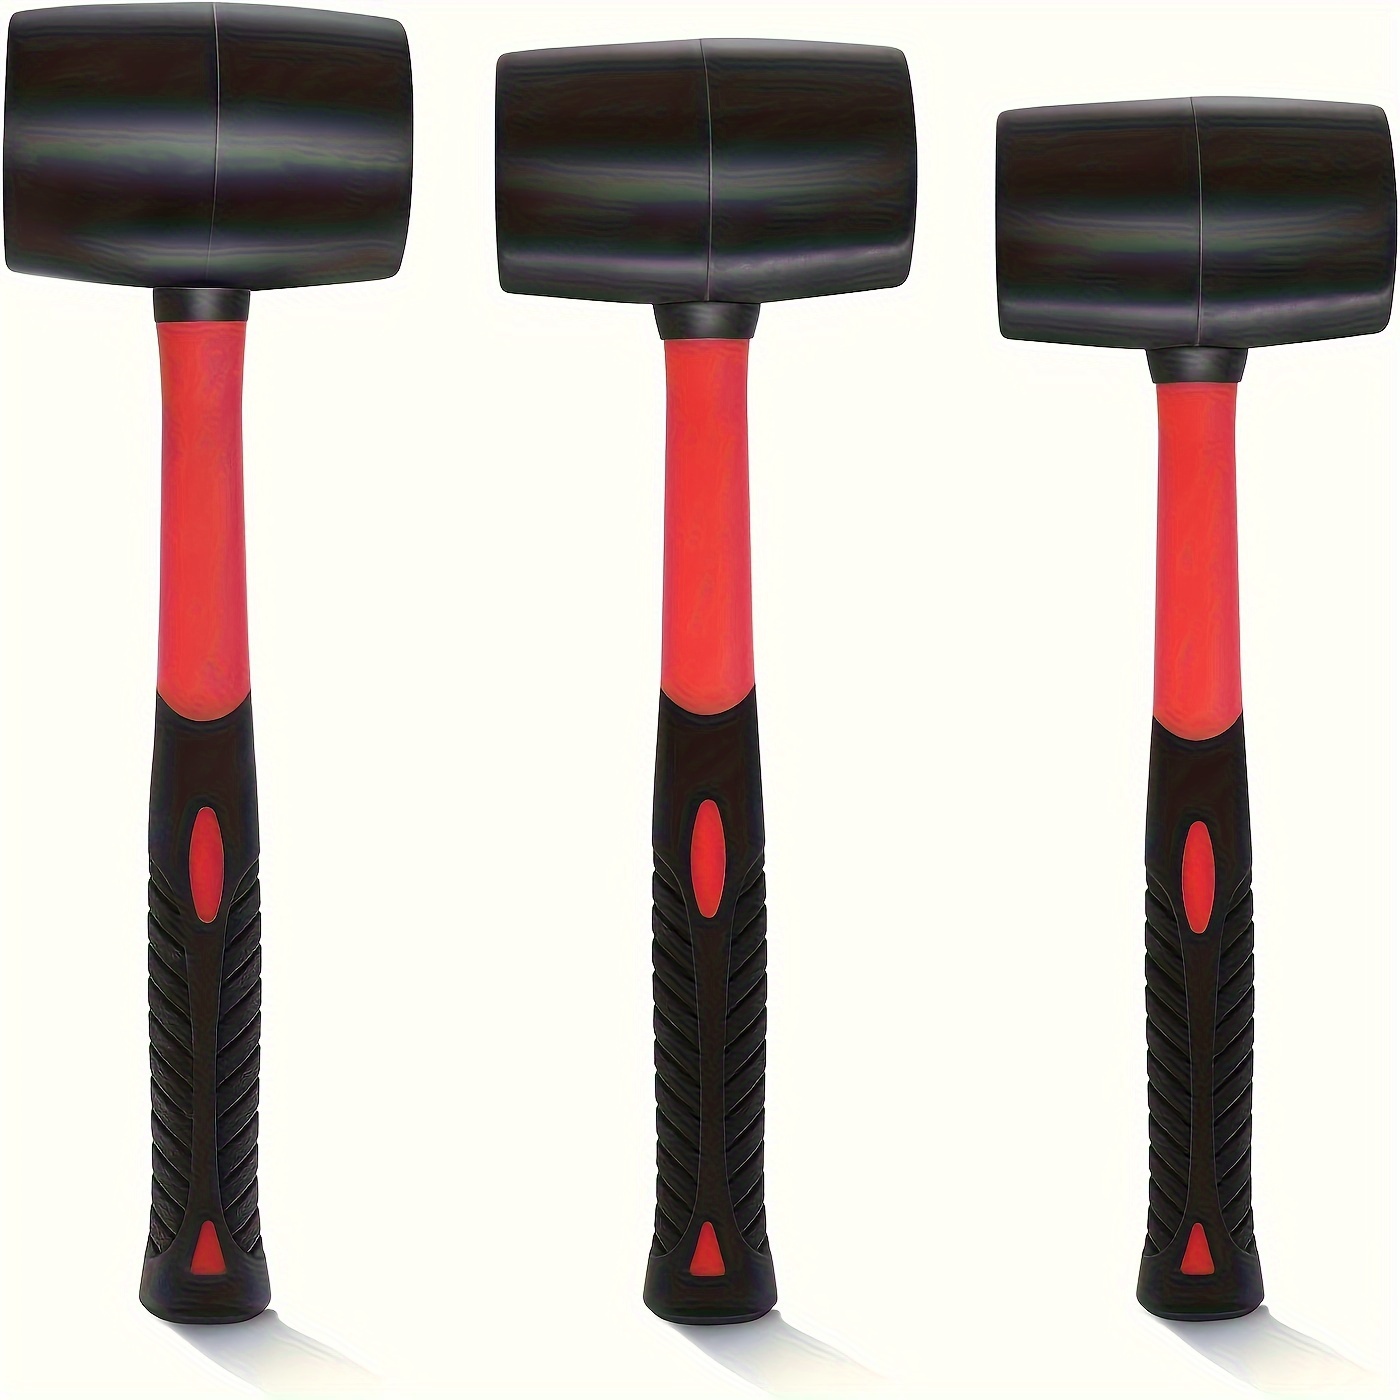 

3-piece Rubber Hammer Set Double-faced Soft Mallet Non-slip Handle Durable Solid Mallet Black And Red Mallet Hammer (8, 16, 32 Ounce)